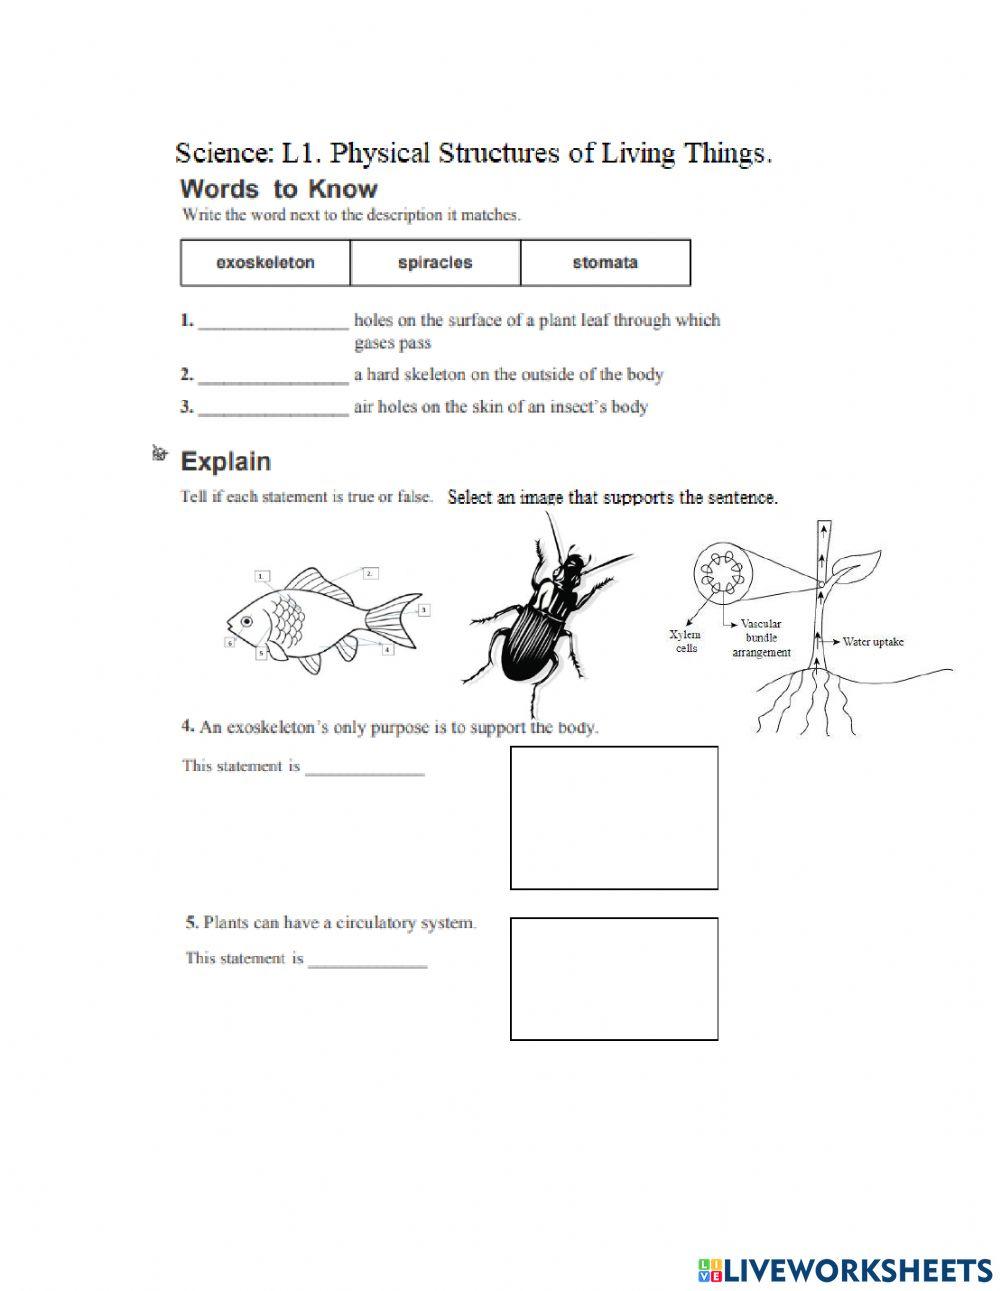 Science: L.1 Physical Structures in Living Things.